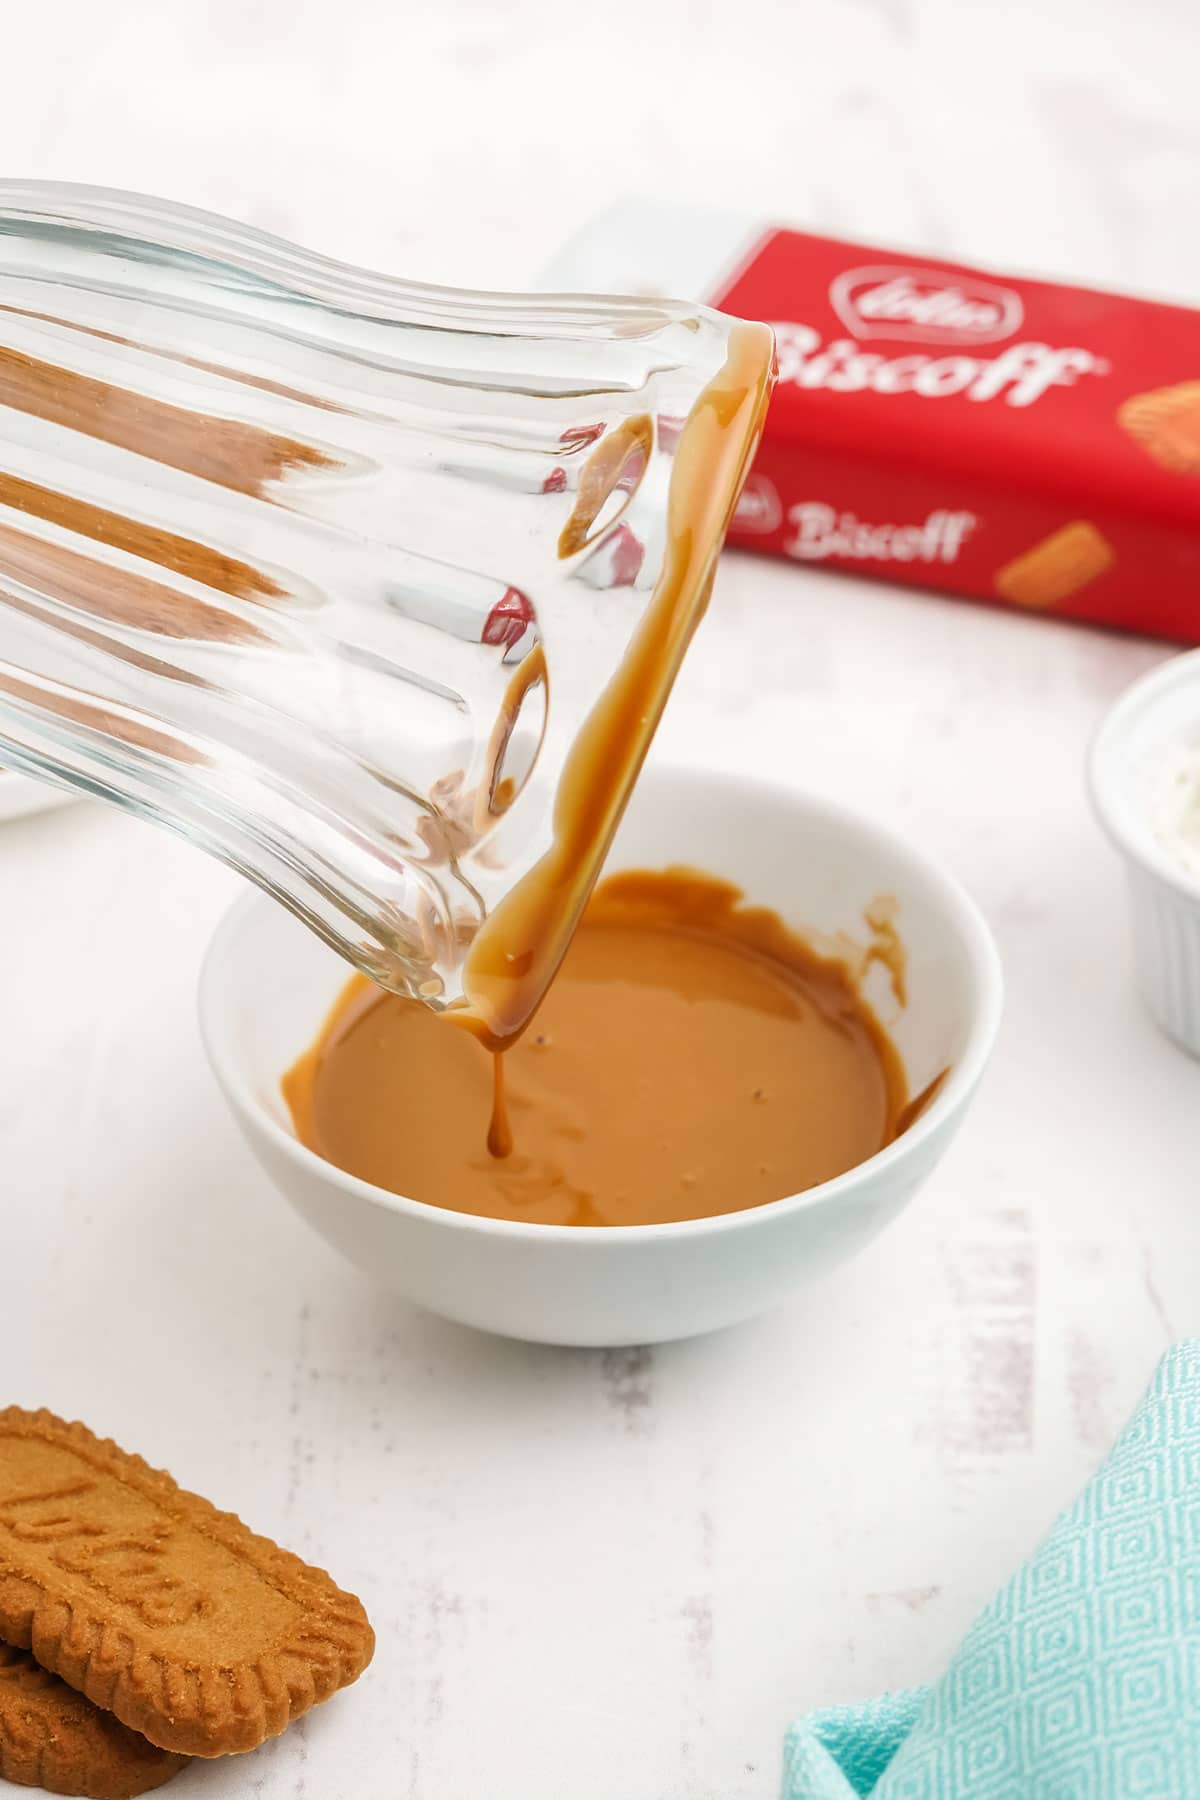 Dipping glass in caramel sauce so cookies stick.